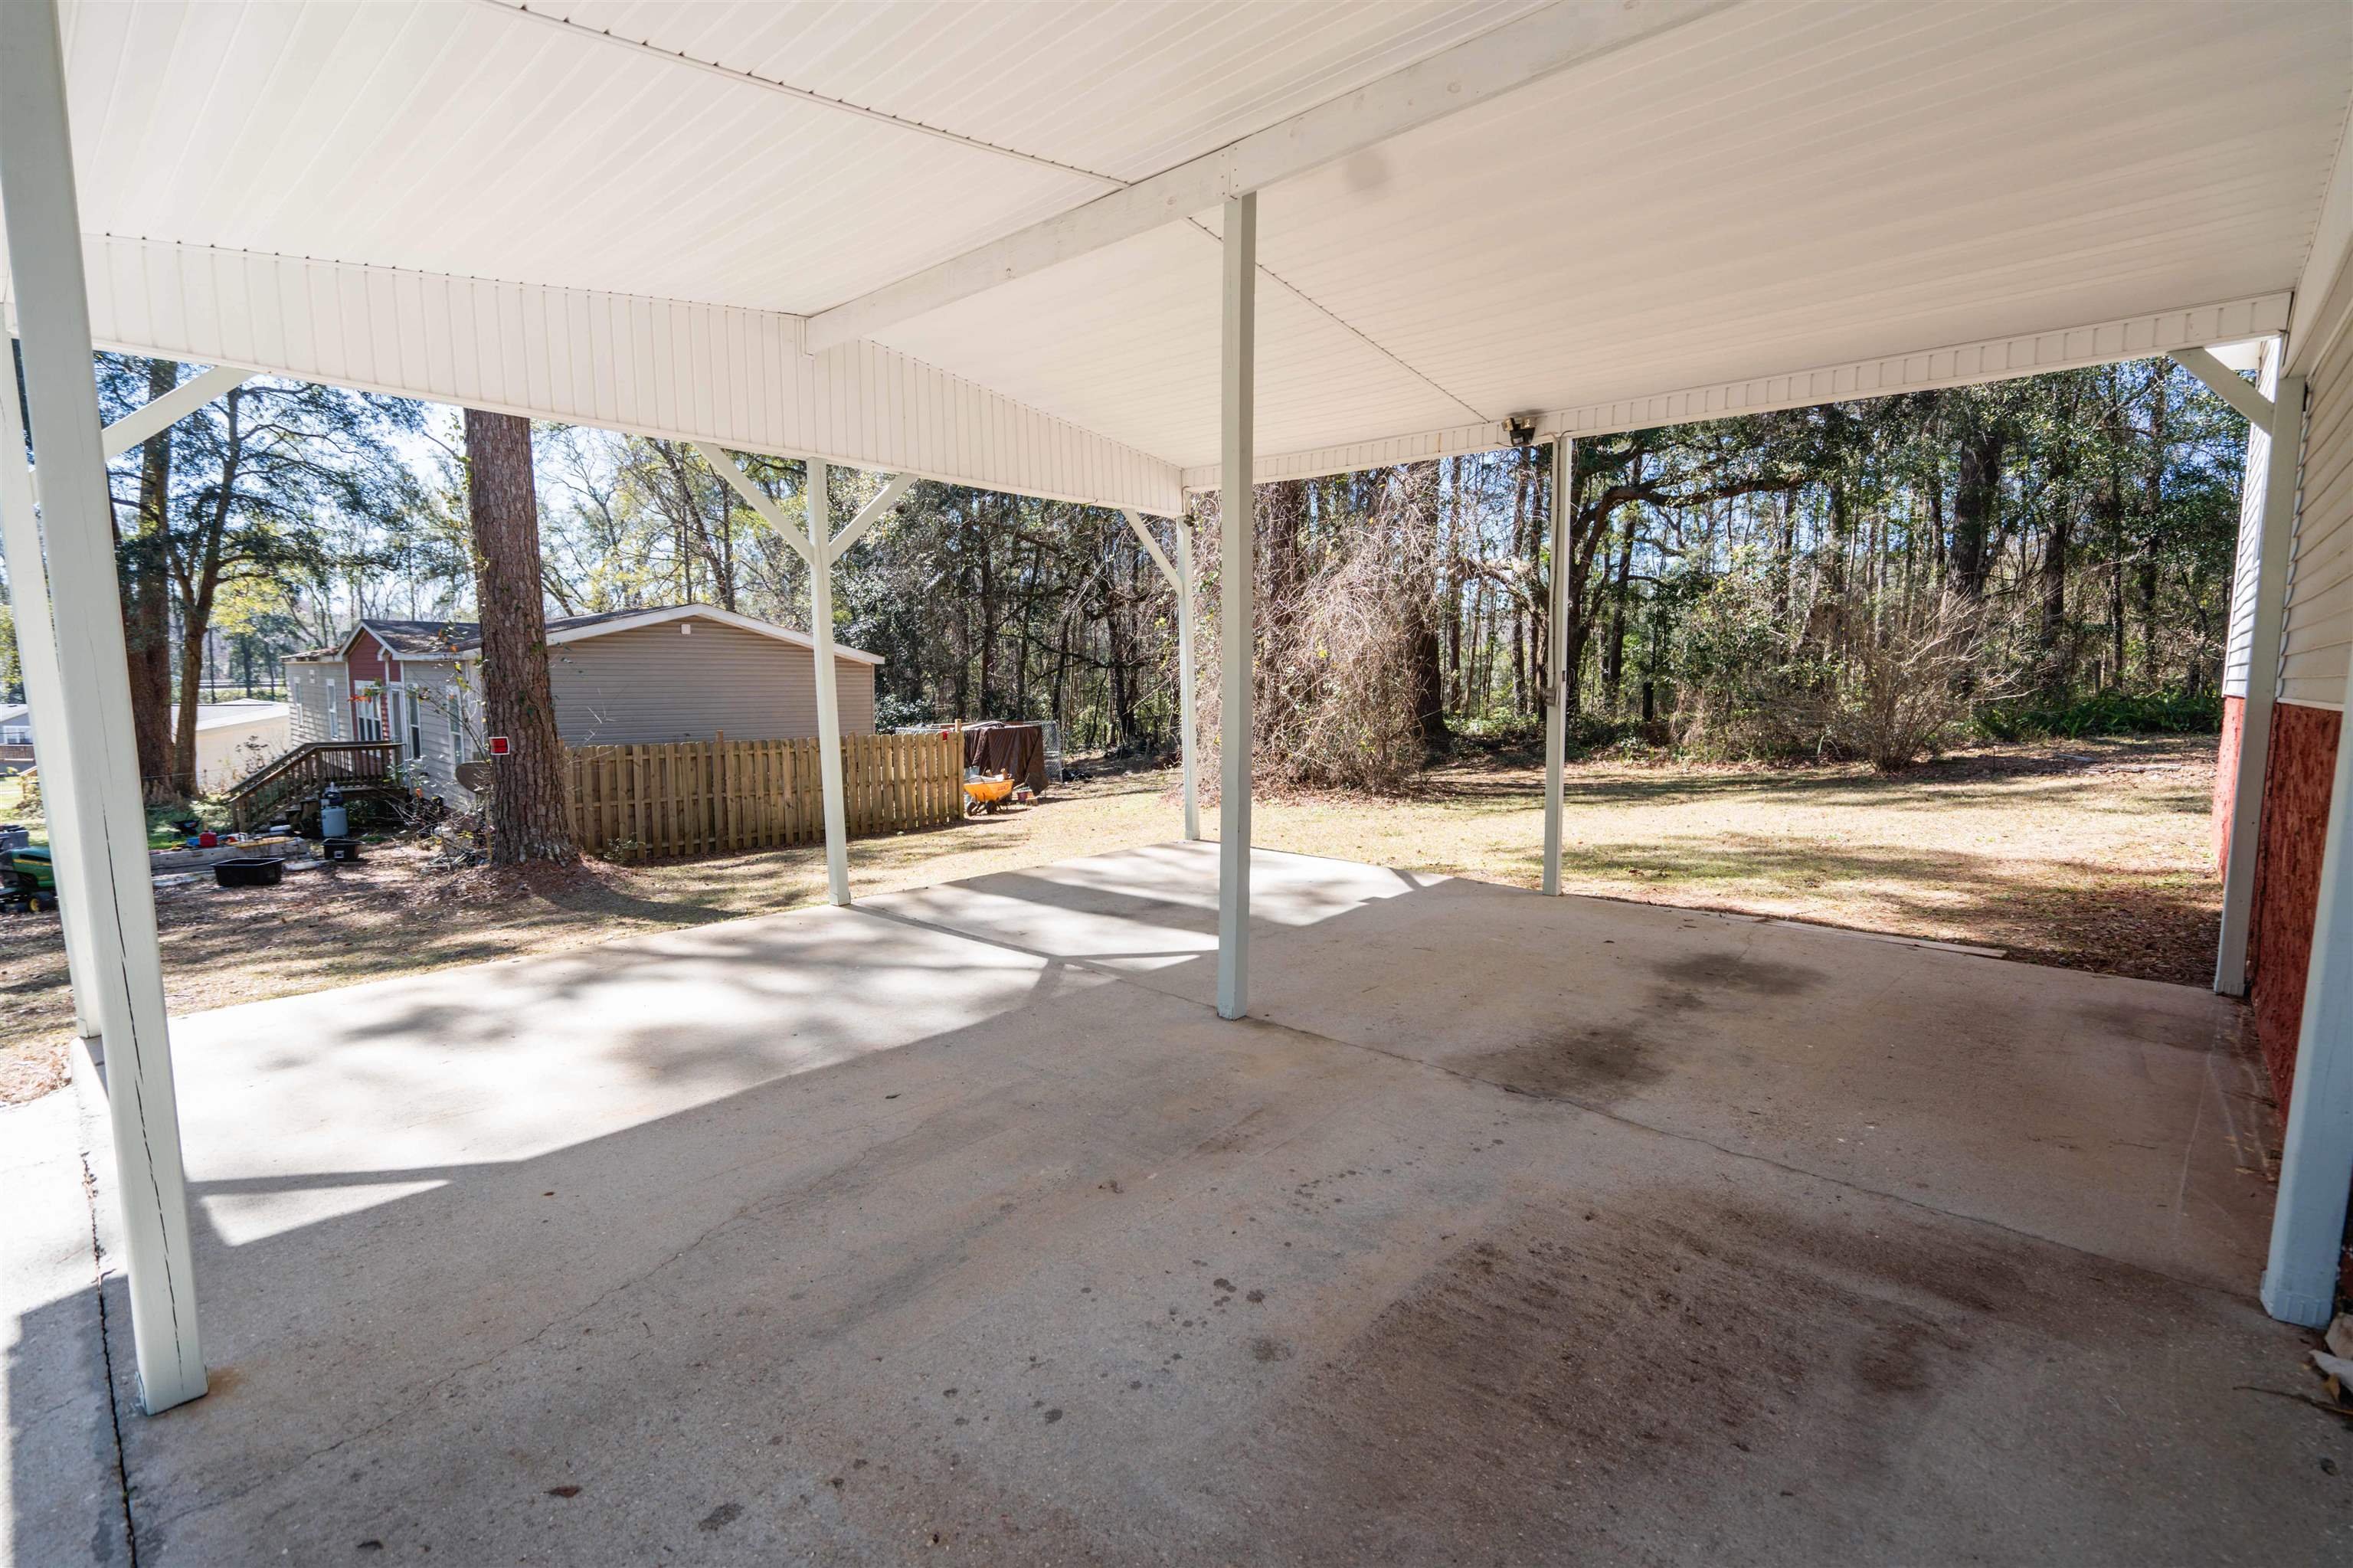 2032 Plantation Forest Drive,TALLAHASSEE,Florida 32317,3 Bedrooms Bedrooms,2 BathroomsBathrooms,Manuf/mobile home,2032 Plantation Forest Drive,368544